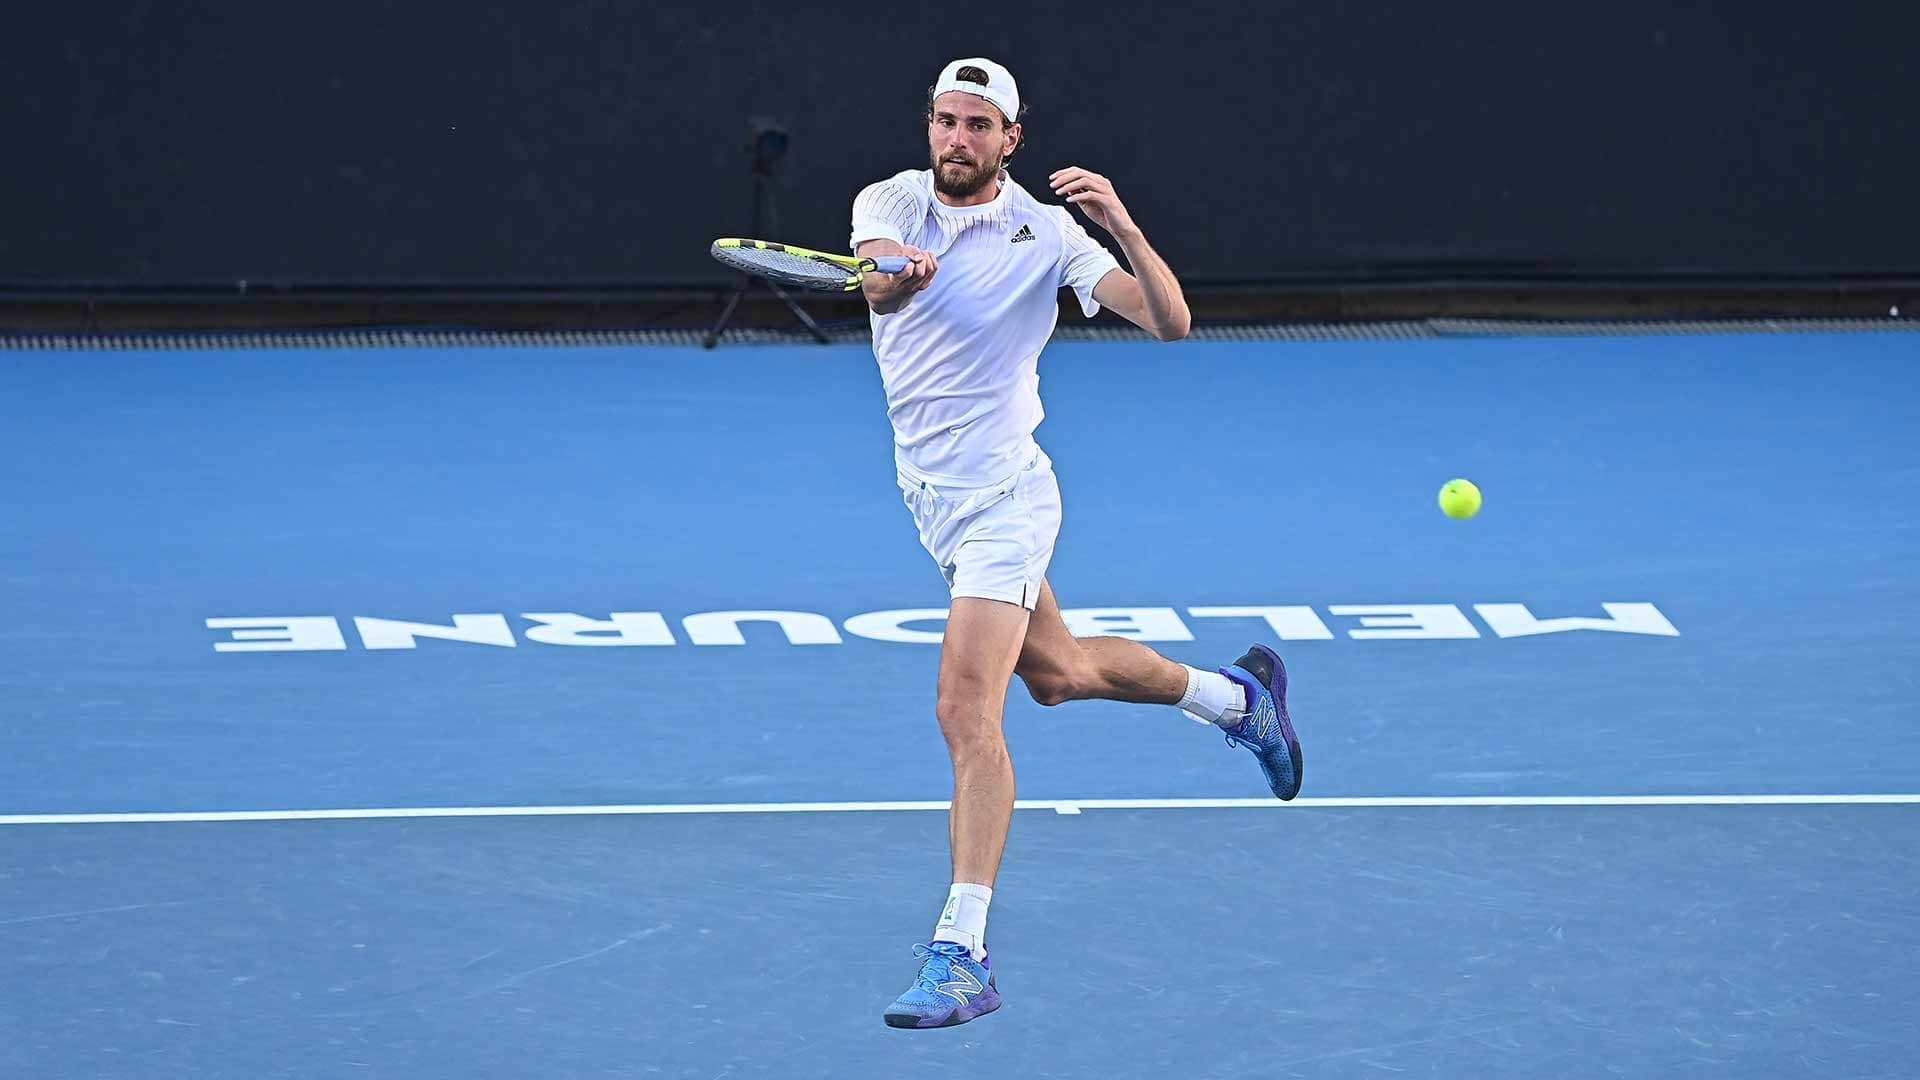 Maxime Cressy charges into the fourth round of the Australian Open on the back of his serve and volley game.